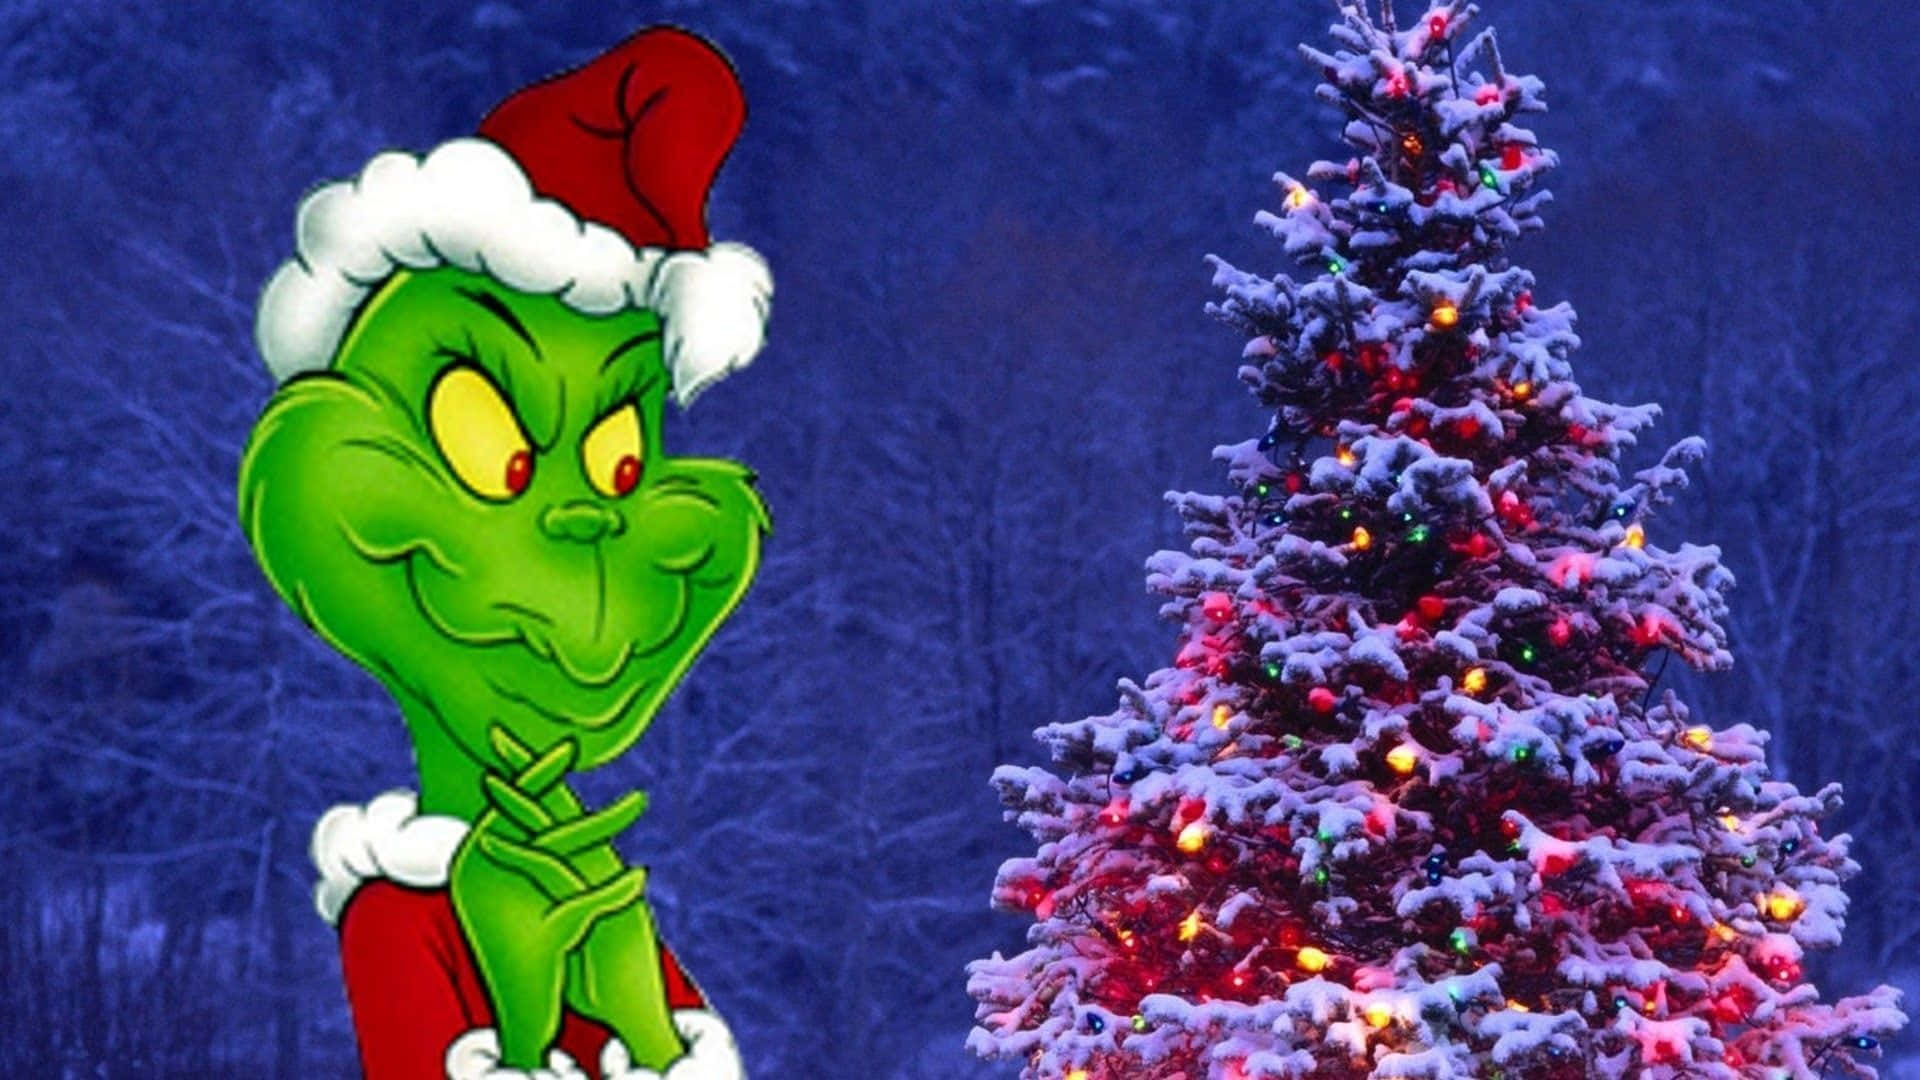 Image Celebrate The Holidays With A Smile As The Infamous Christmas Grinch Brings Joy And Laughter This Holiday Season.